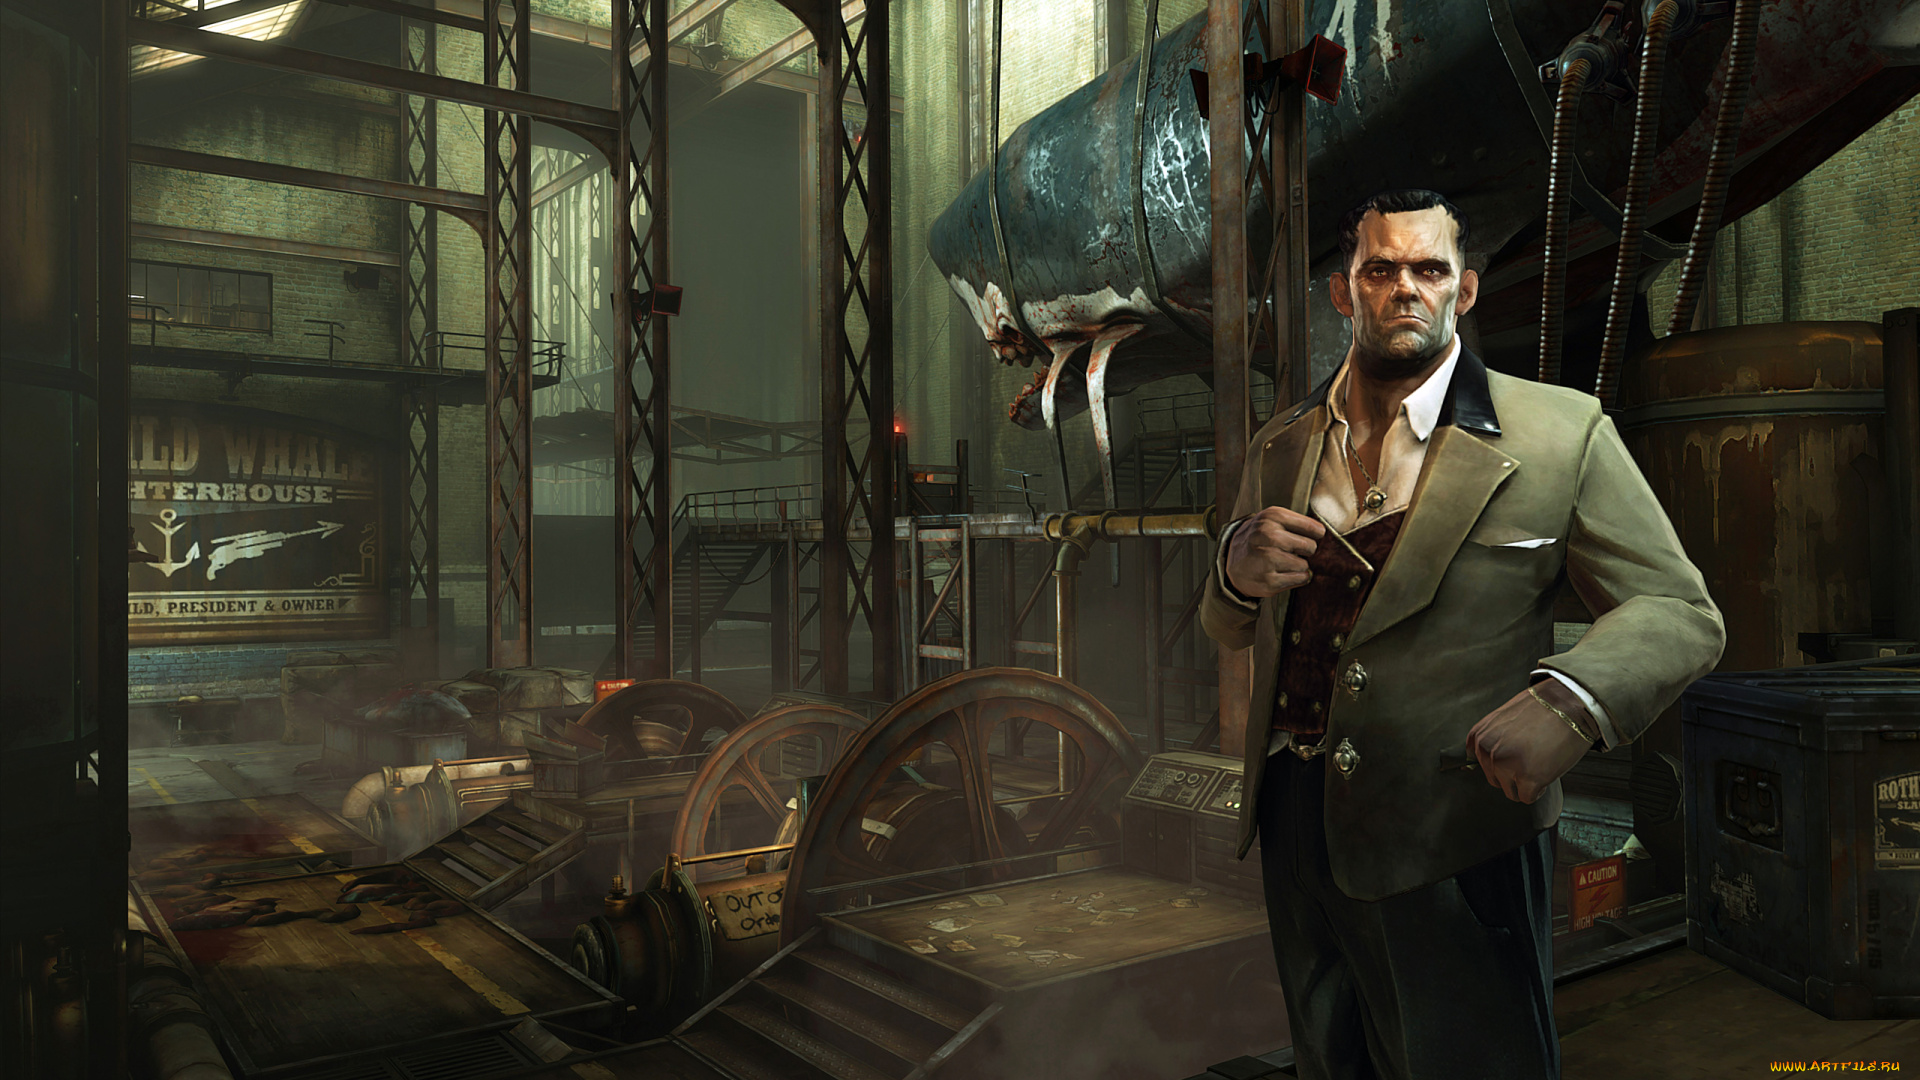 dishonored, the, knife, of, dunwall, видео, игры, action